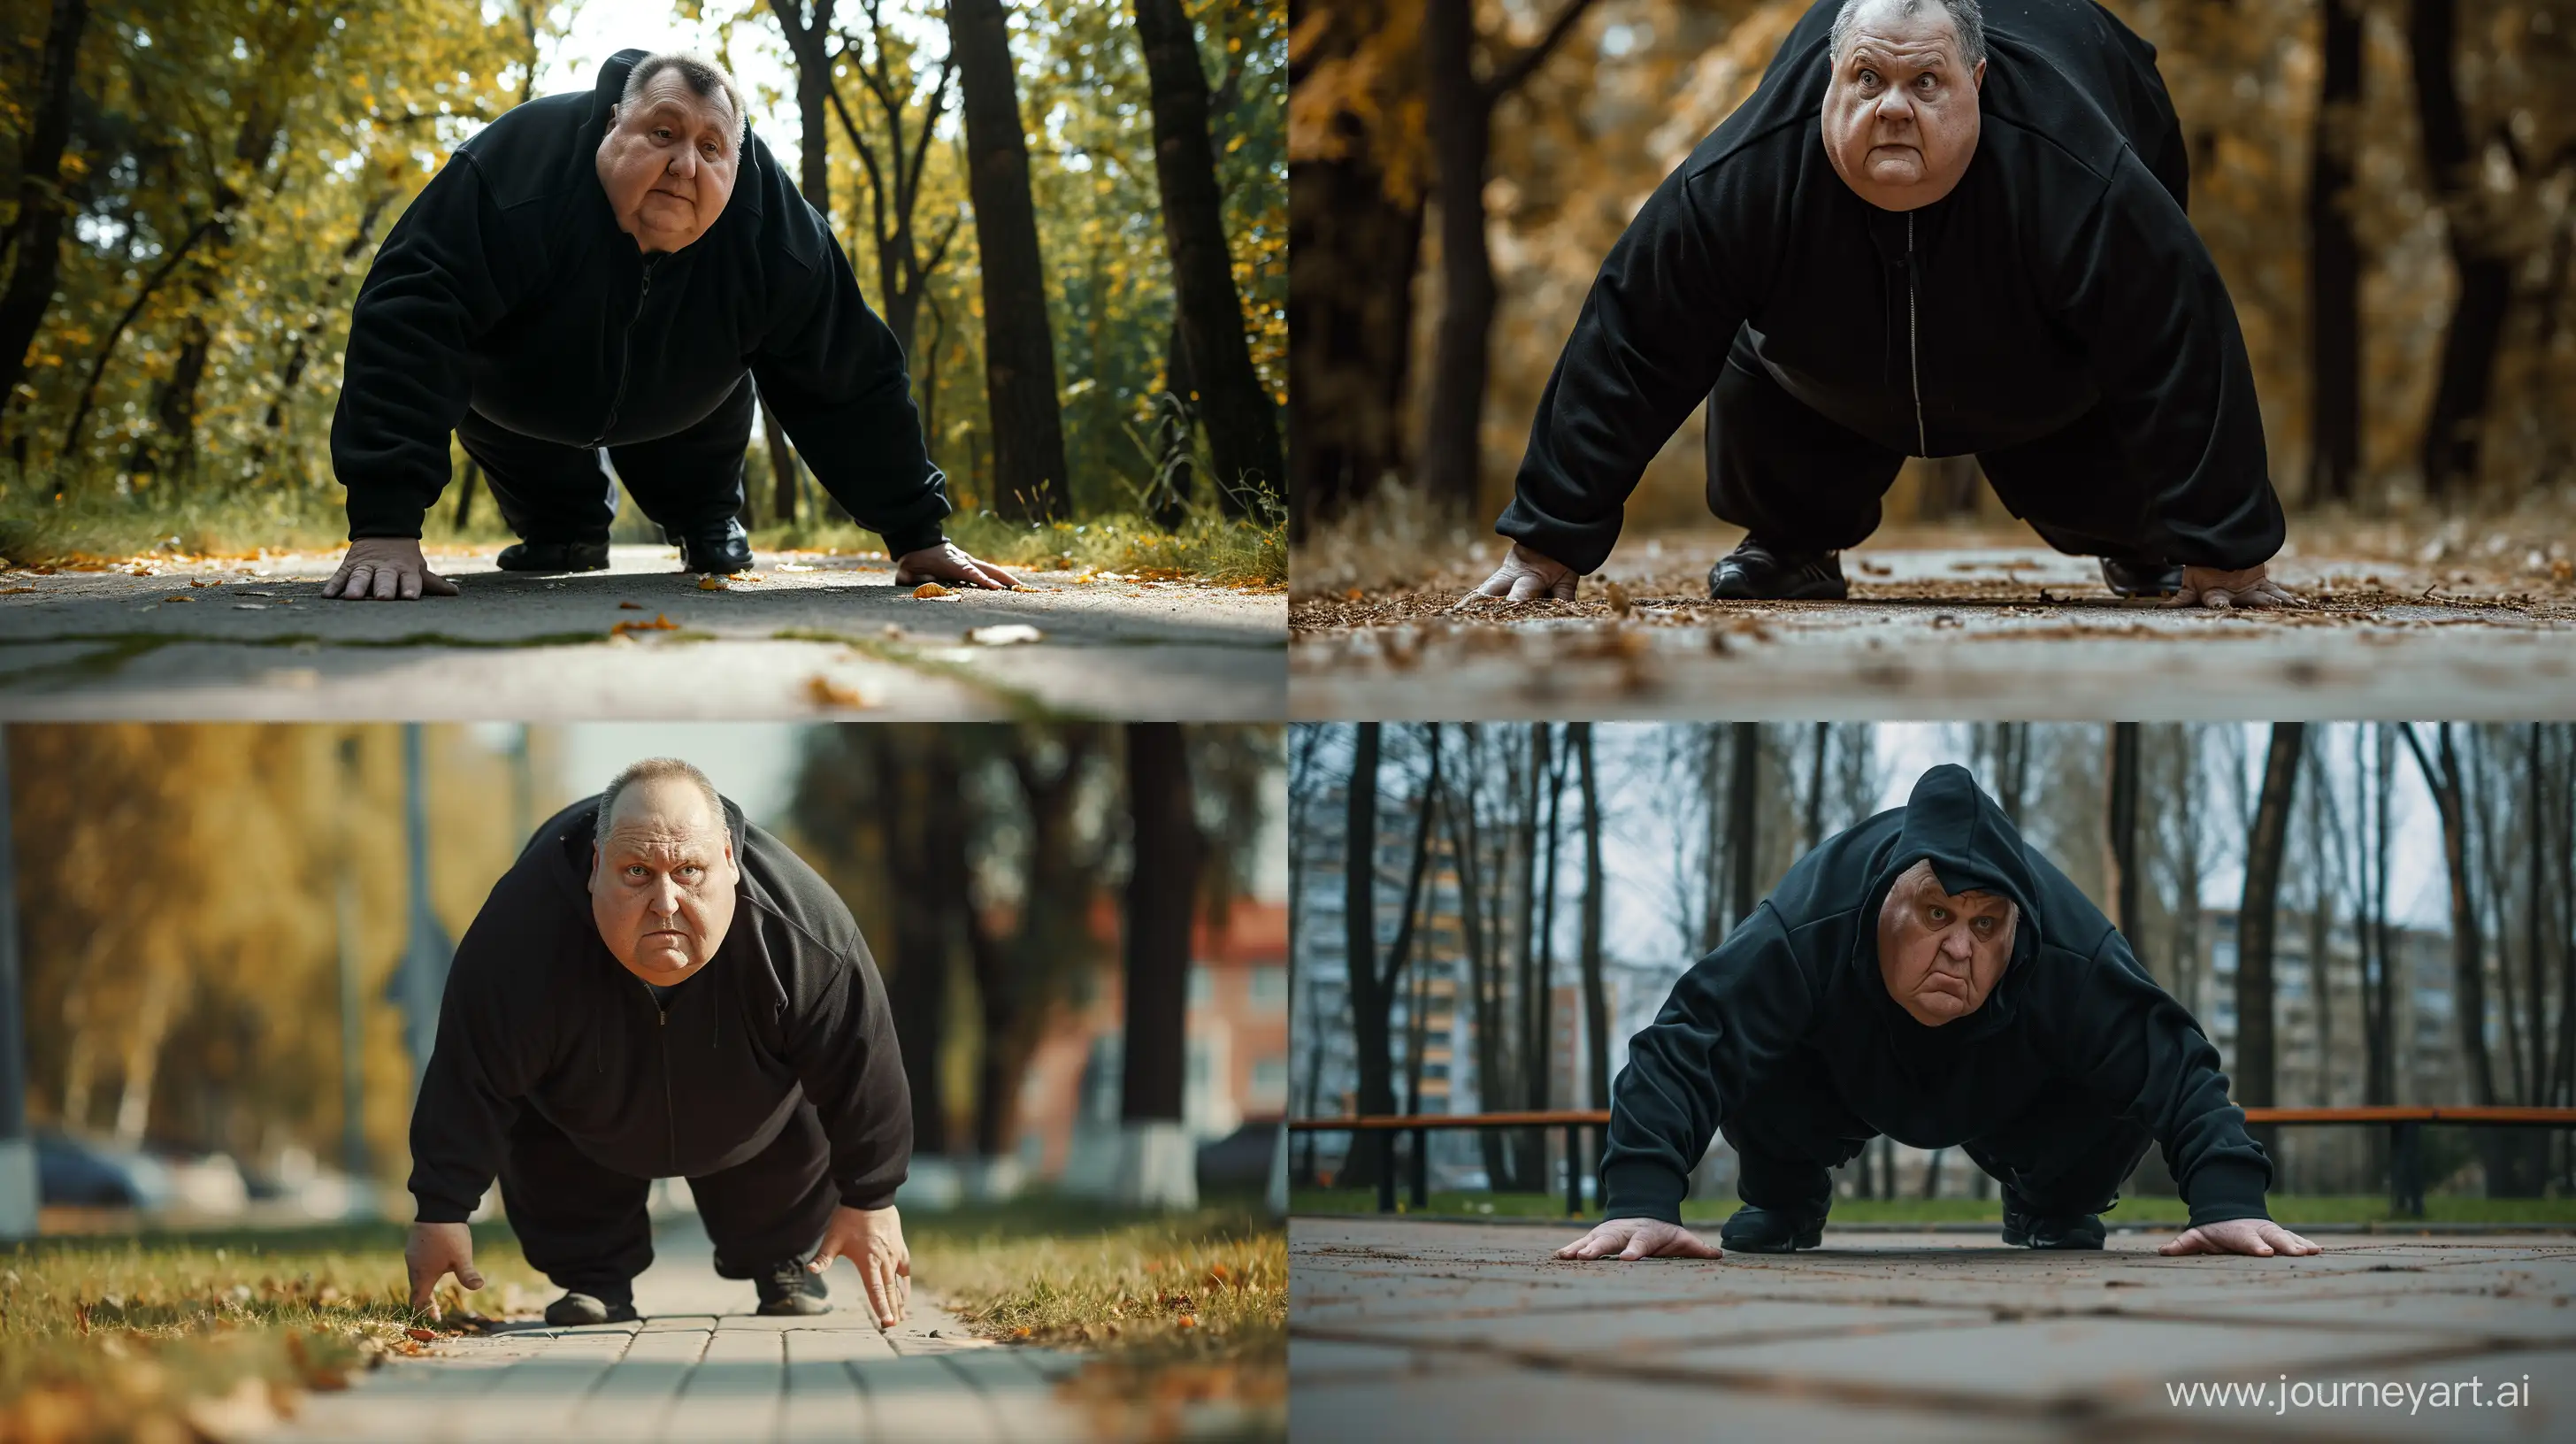 Active-Senior-in-Outdoor-Exercise-70YearOld-Man-in-Black-Tracksuit